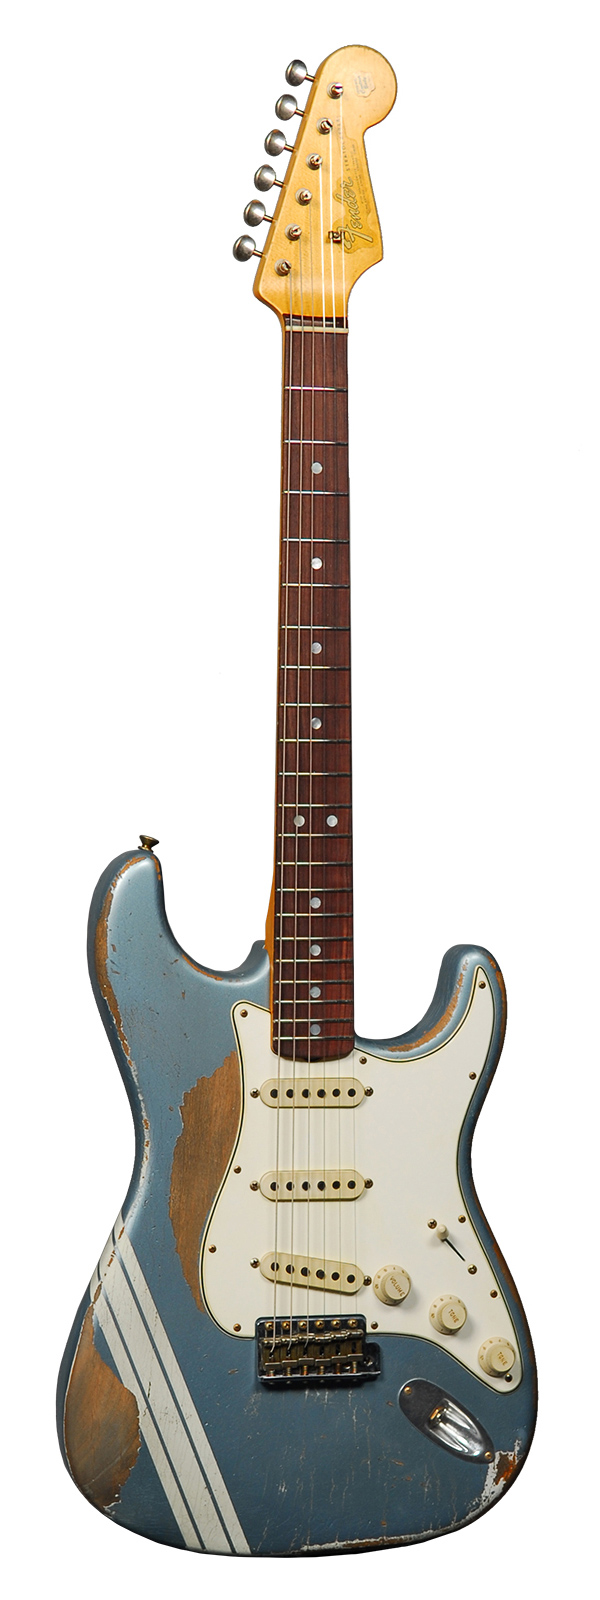 FENDER CUSTOM SHOP 65 STRAT RELIC MASTERBUILT BY GREG FESSLER BLUE ICE METALLIC WITH OLYMPIC WHITE COMPETITION STRIPES